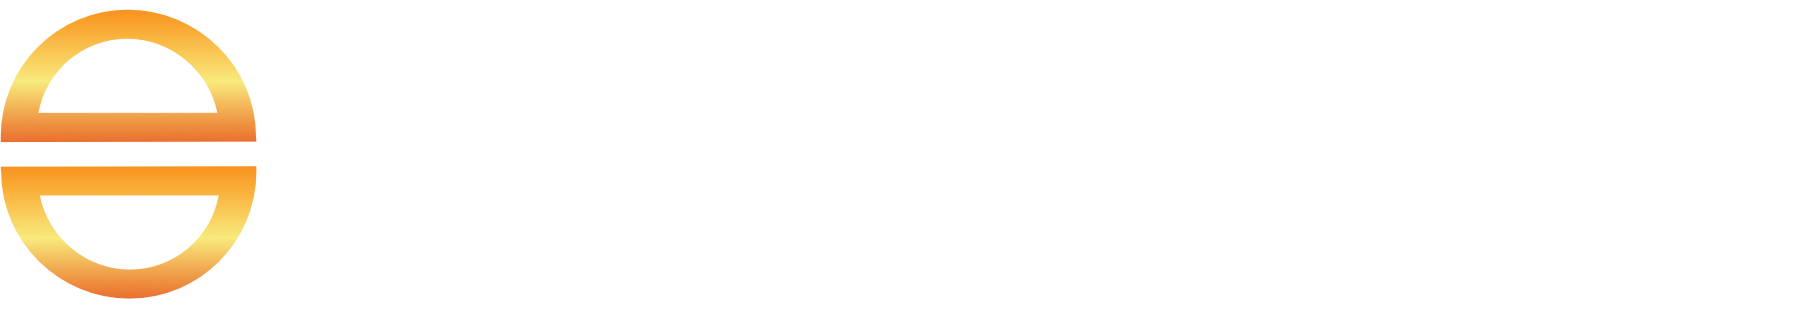 Symmetrii logo with icon and text - The business transparency experts